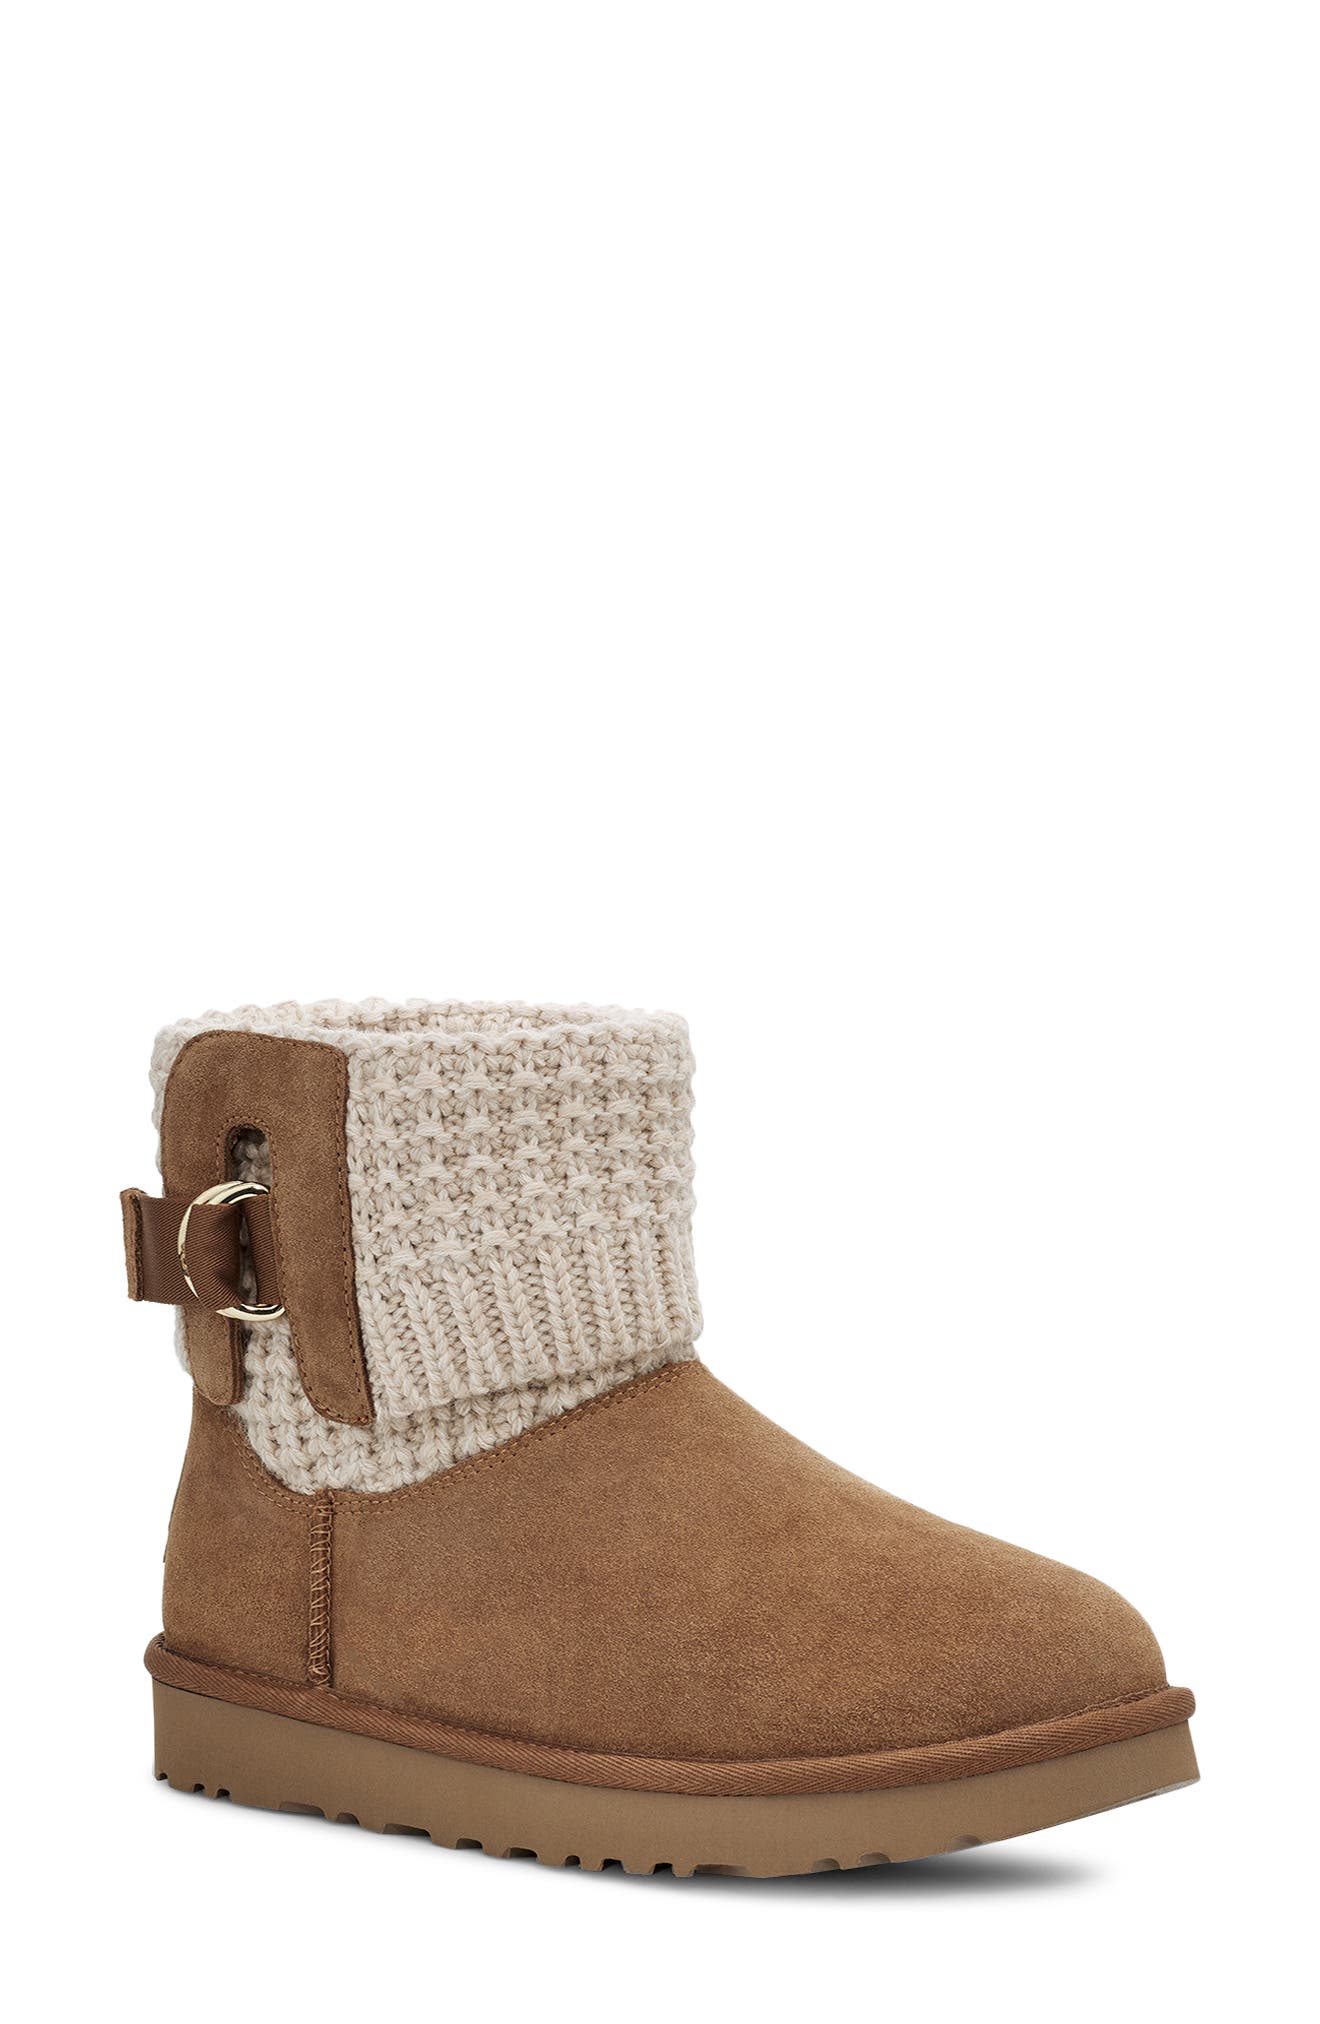 ugg boots with knitted top